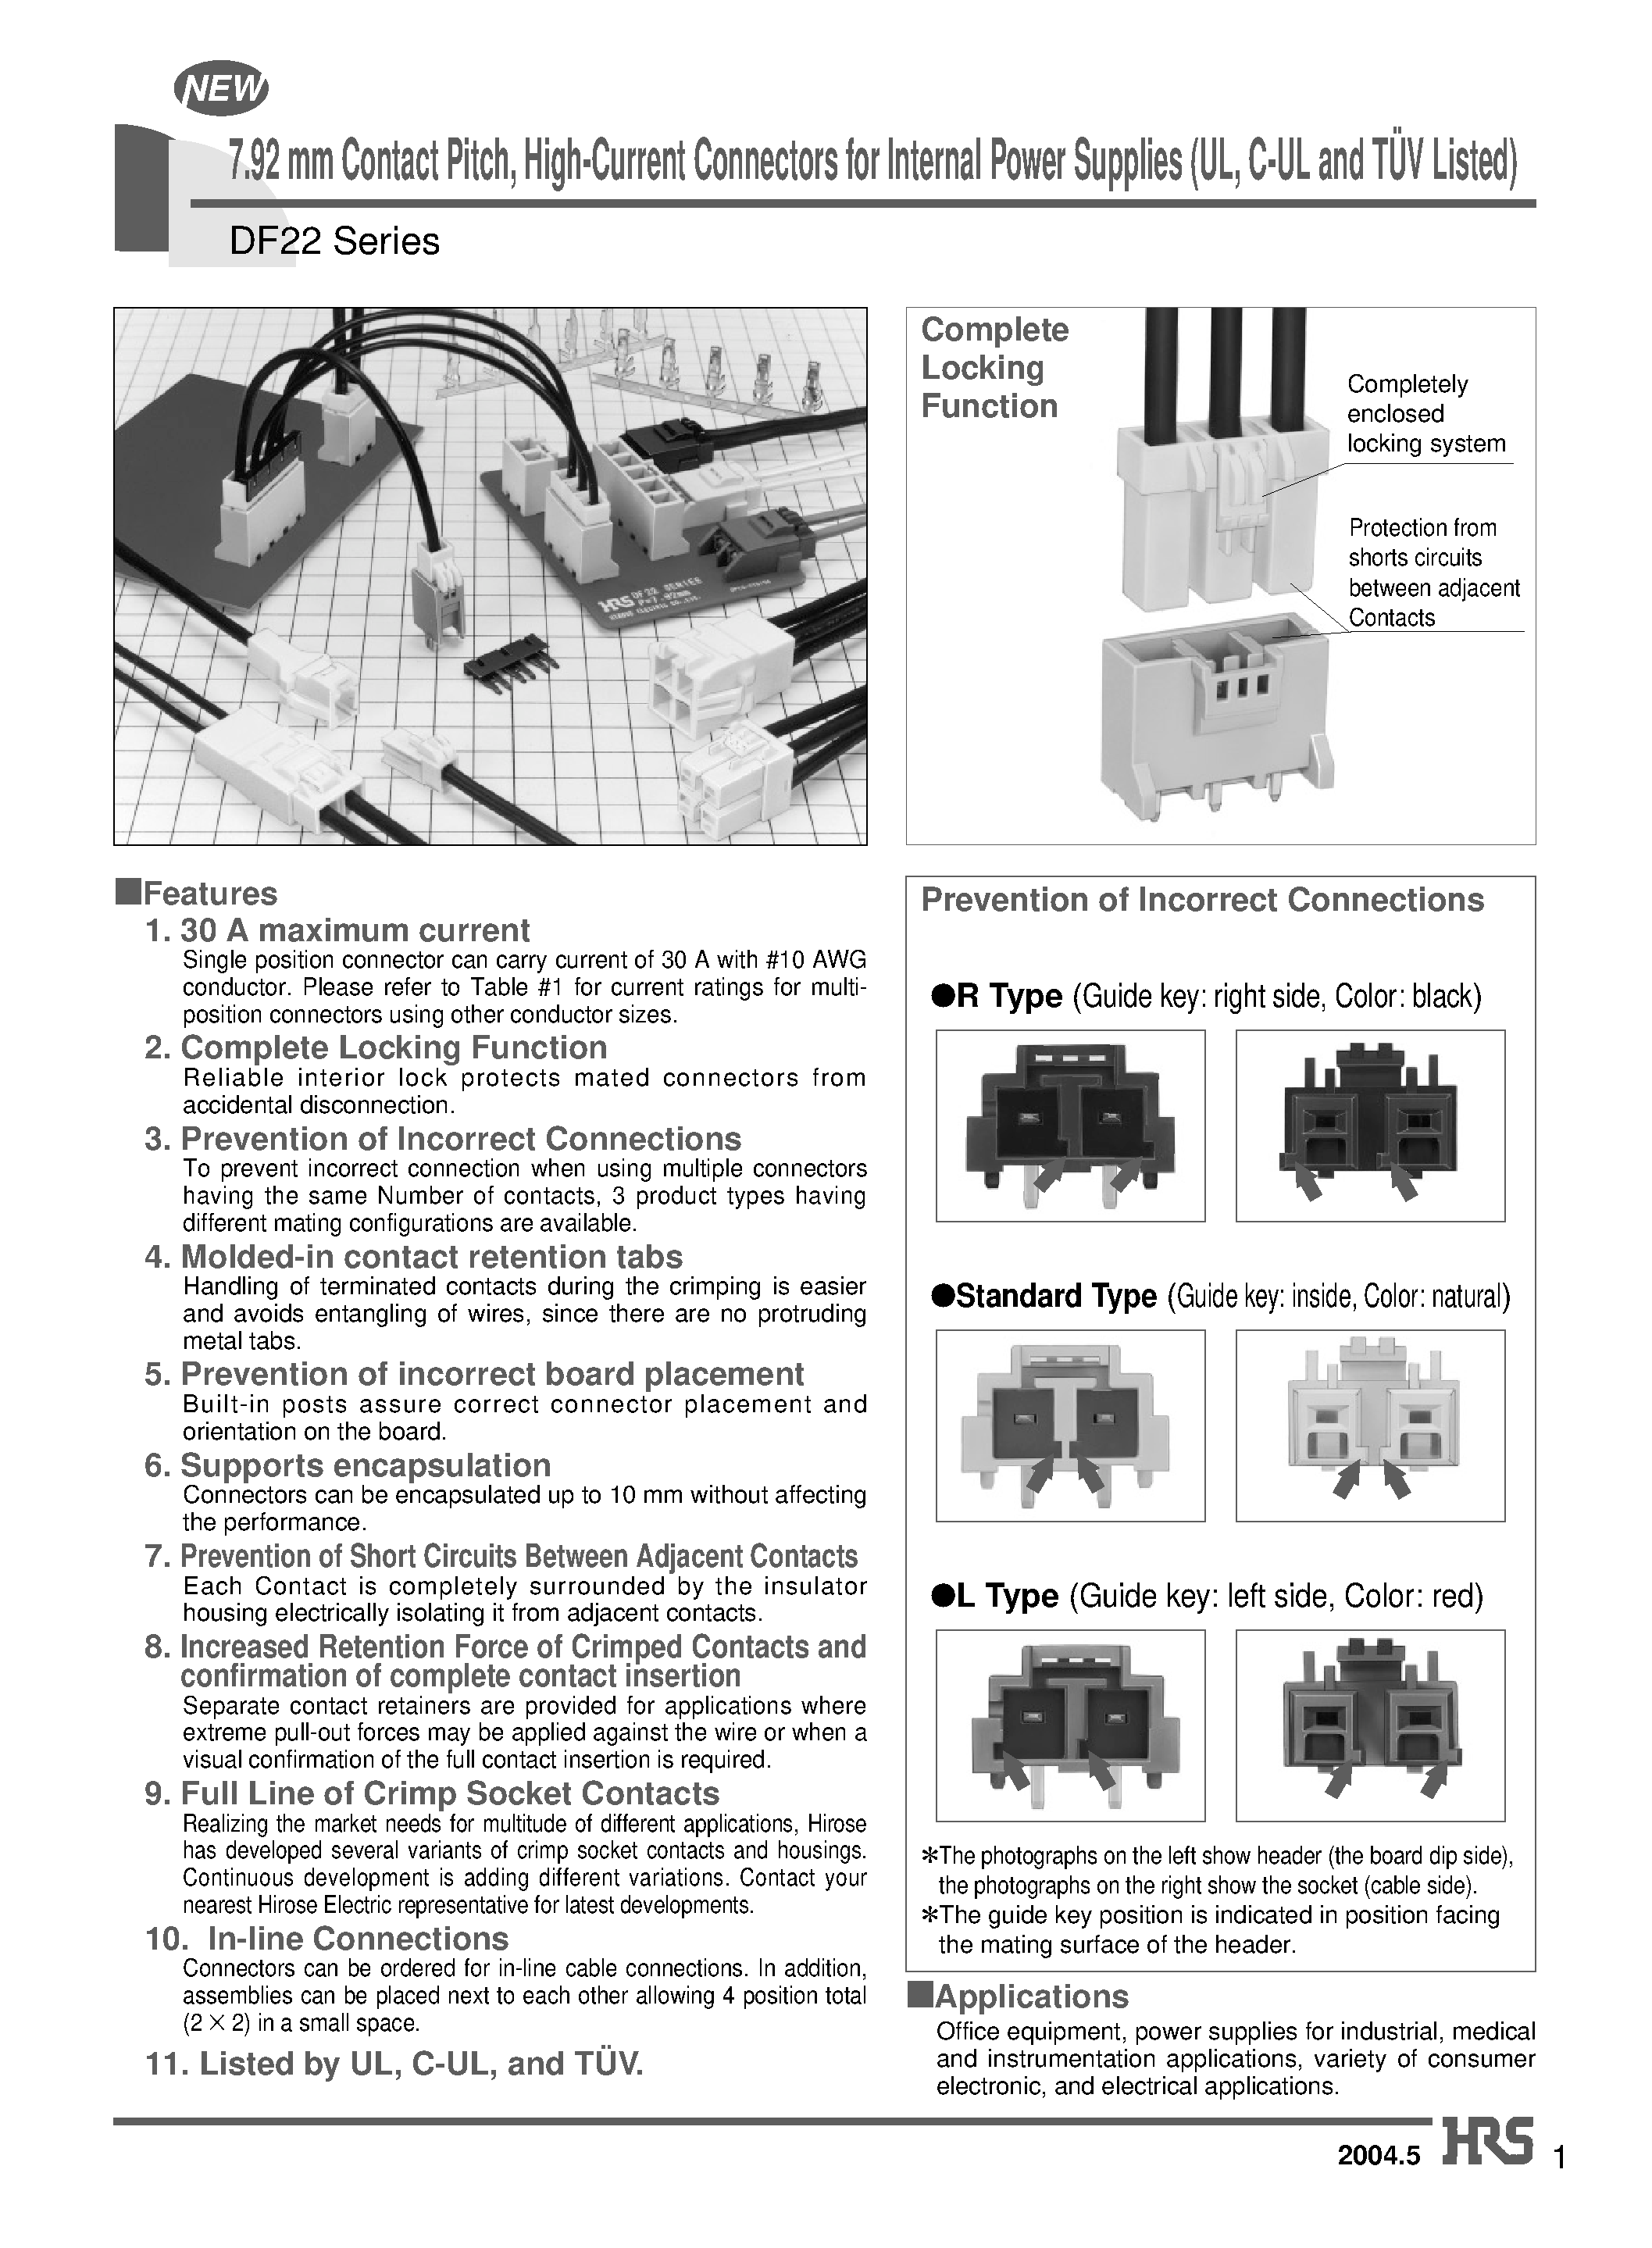 Datasheet DF22-3DEP-7.92DSA - 7.92 mm Contact Pitch/ High-Current Connectors for Internal Power Supplies (UL/ C-UL and TUV Listed) page 1